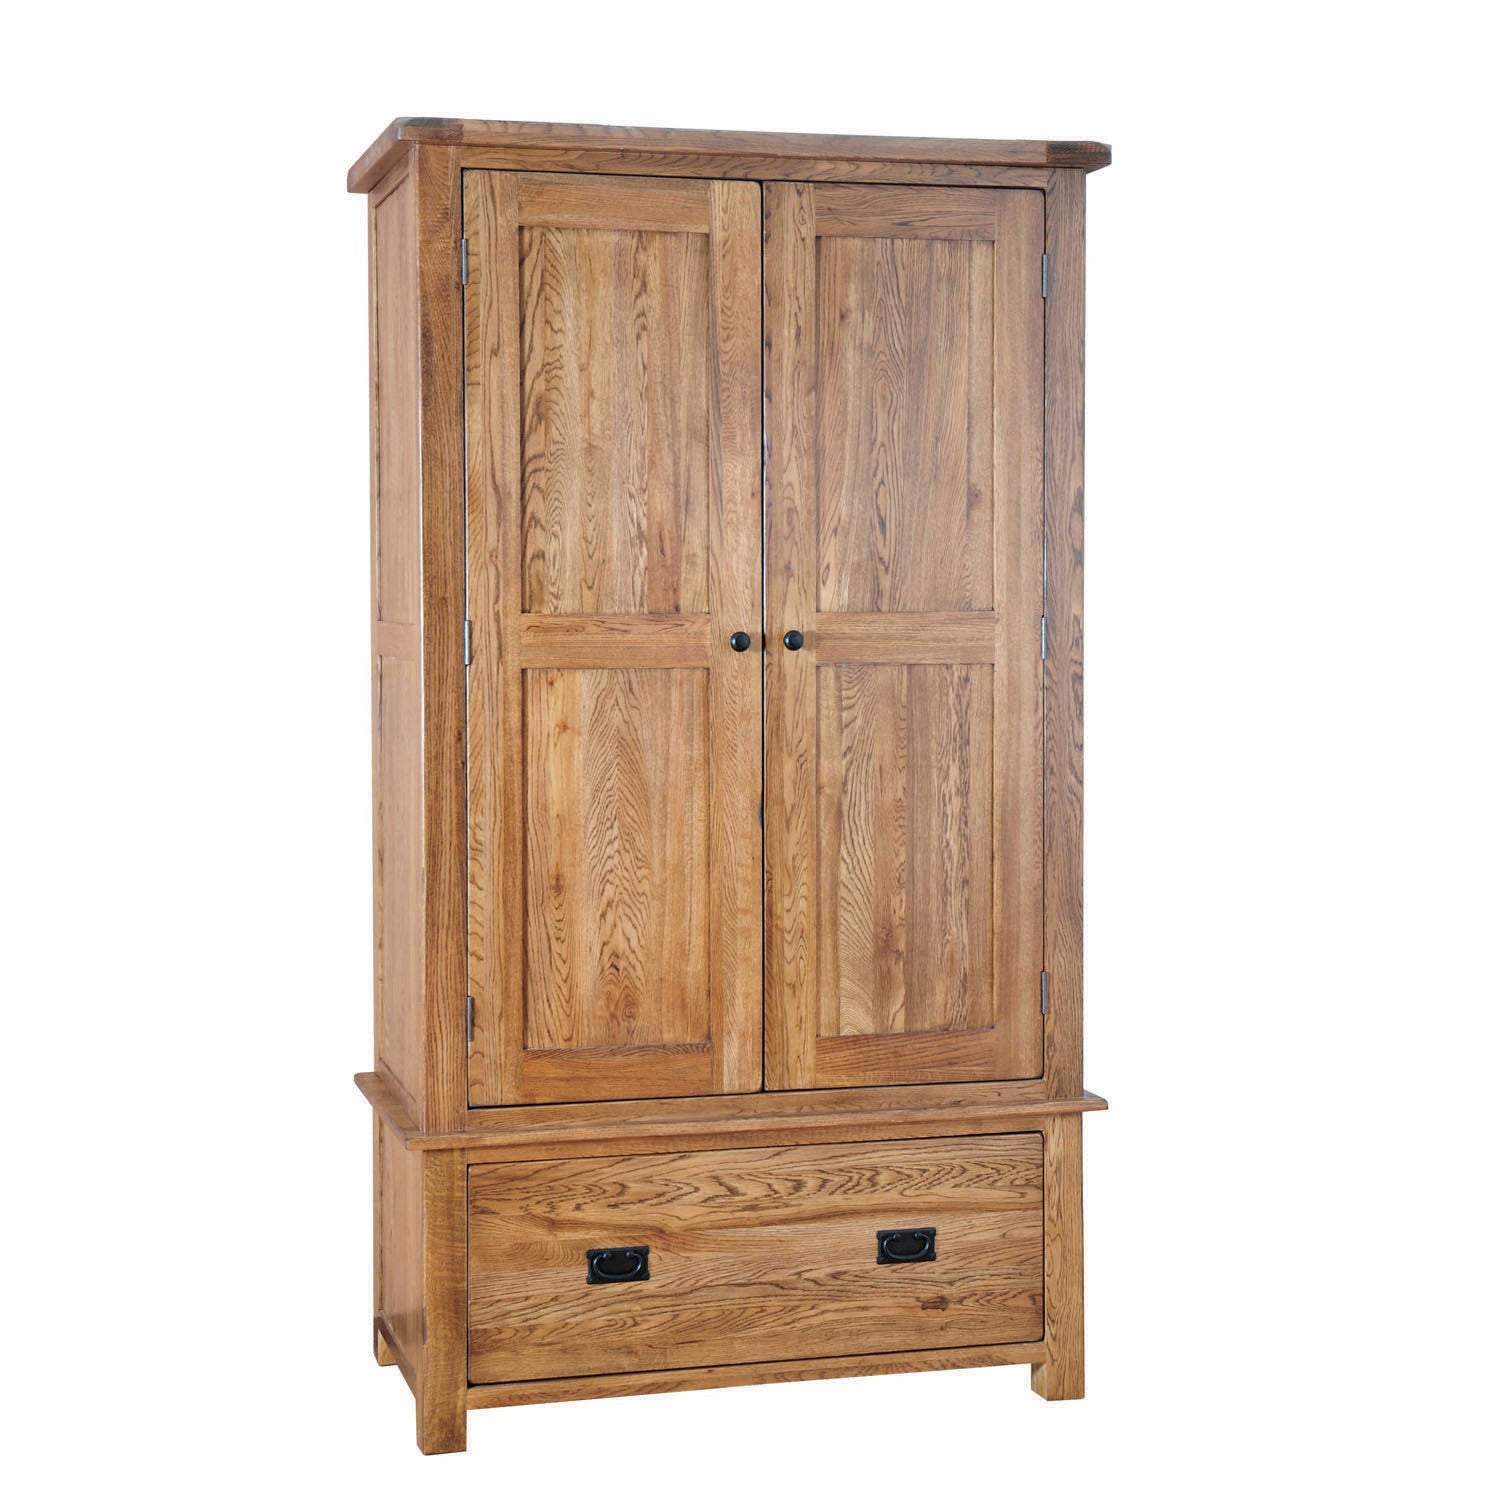 Auvergne Solid Oak Wardrobe - Large 2 Door with Drawer - Better Furniture Norwich & Great Yarmouth